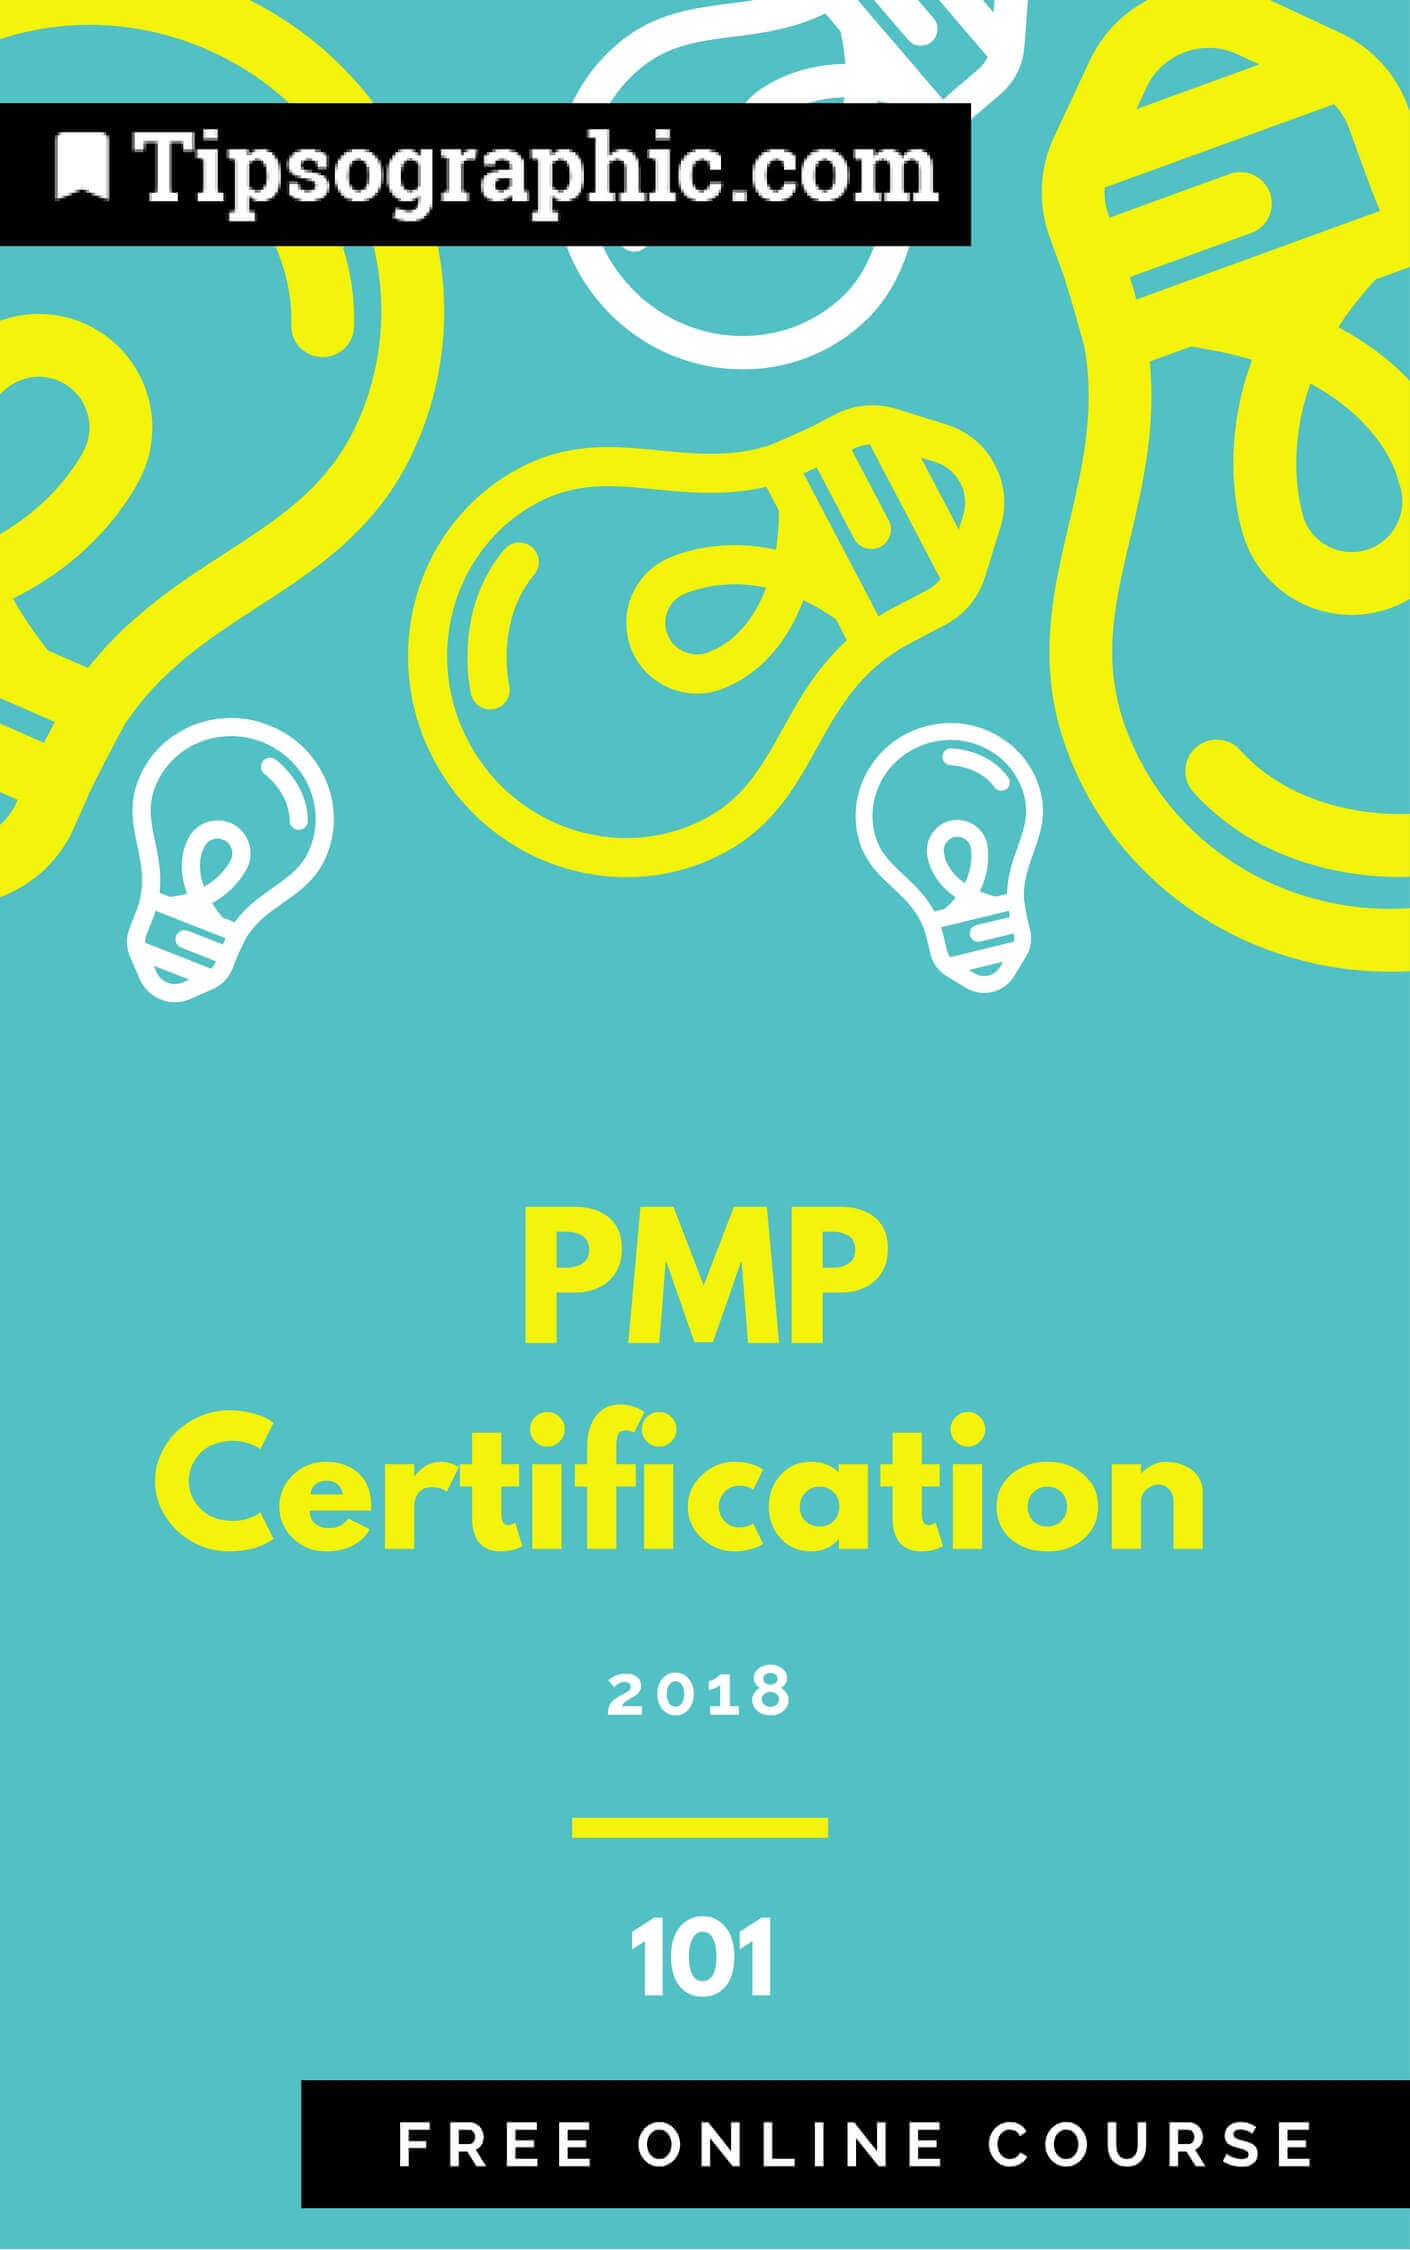 pmp certification 2018 free online course tipsographic